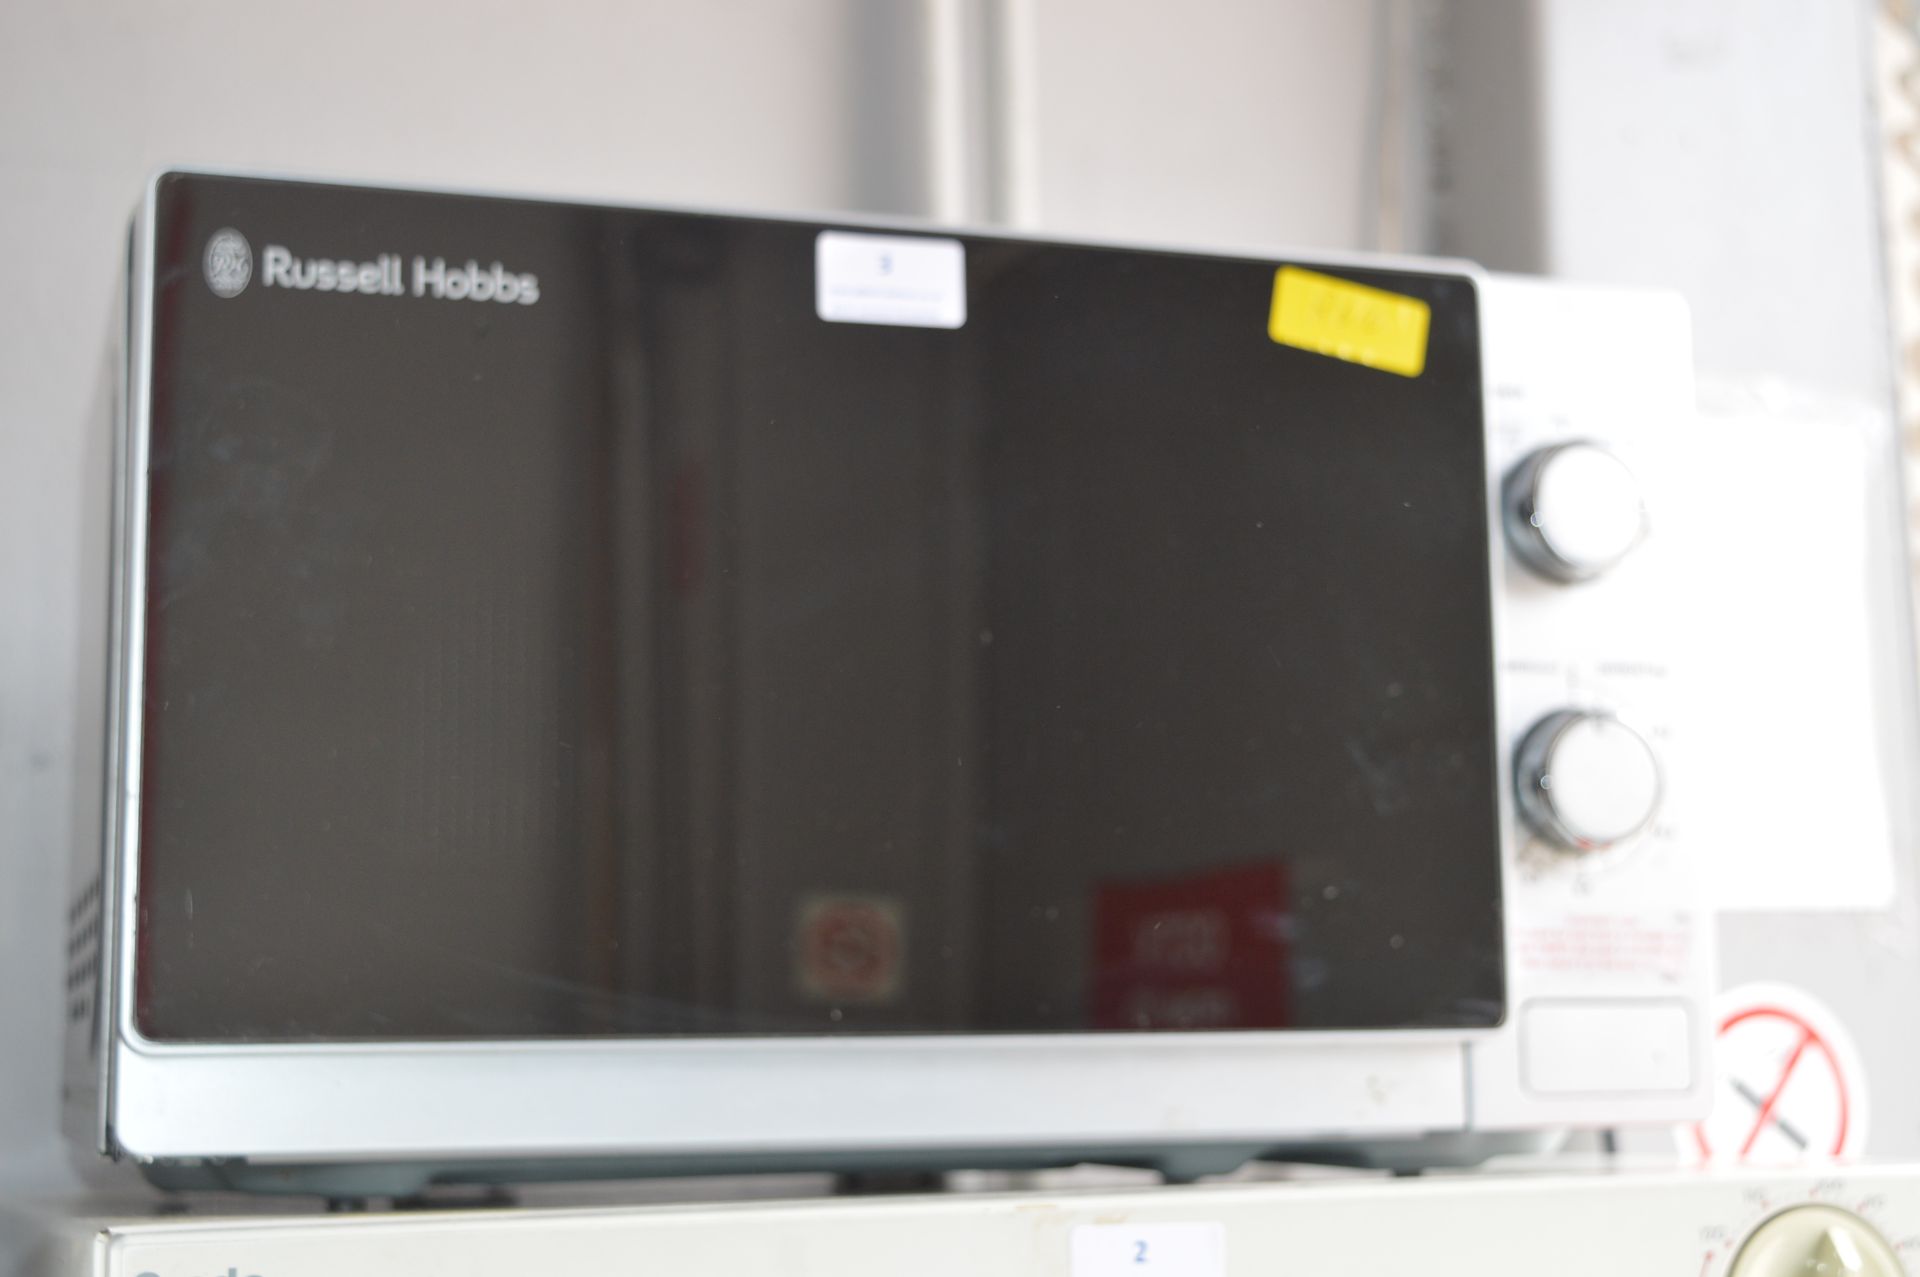 Russell Hobbs Microwave Oven